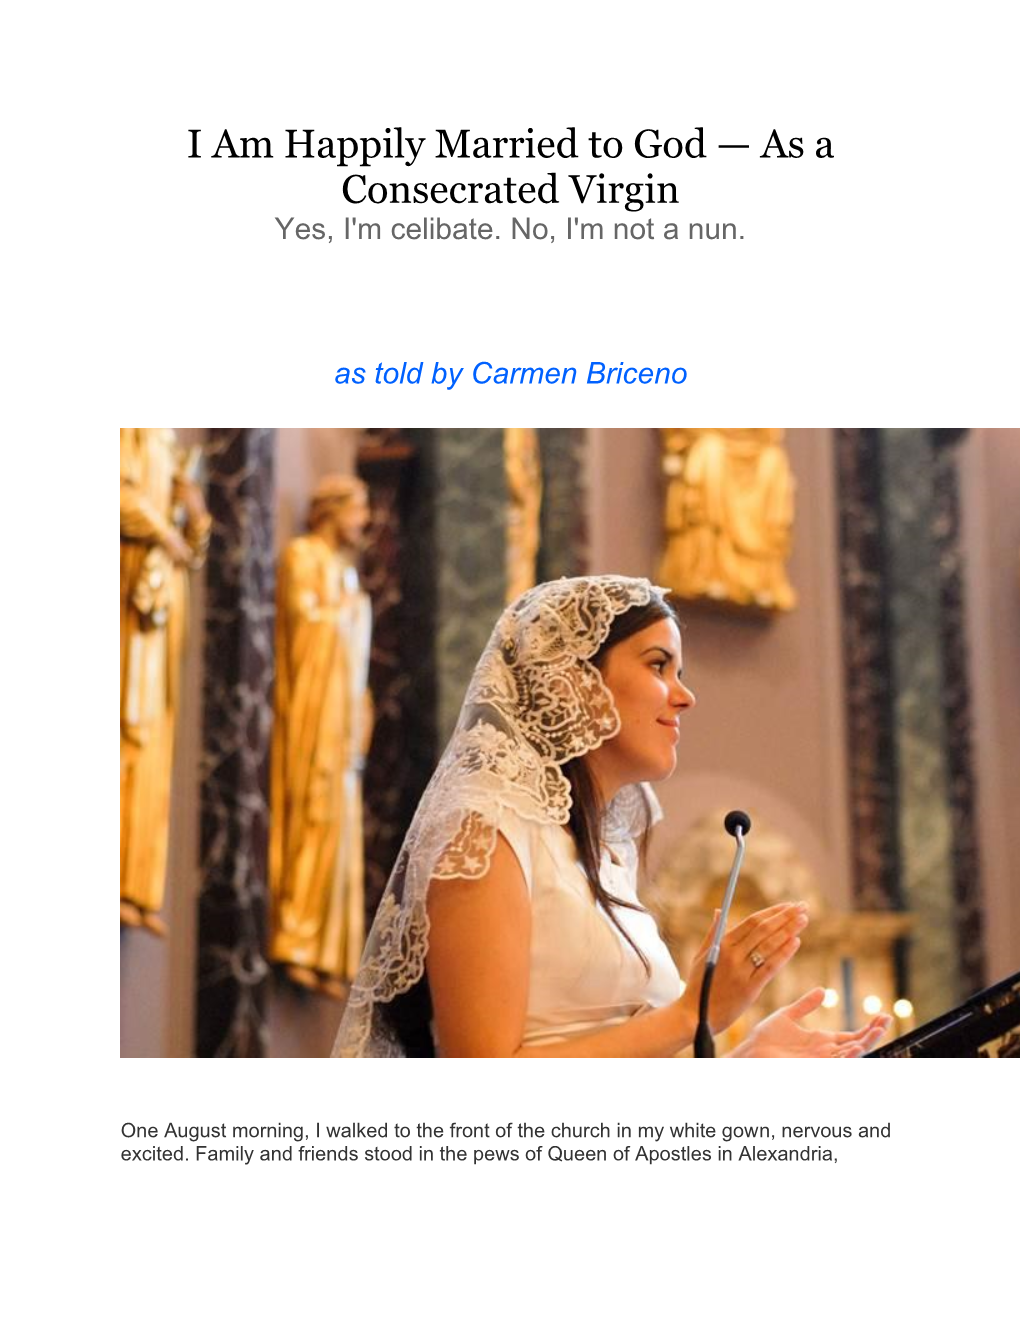 I Am Happily Married to God — As a Consecrated Virgin Yes, I'm Celibate